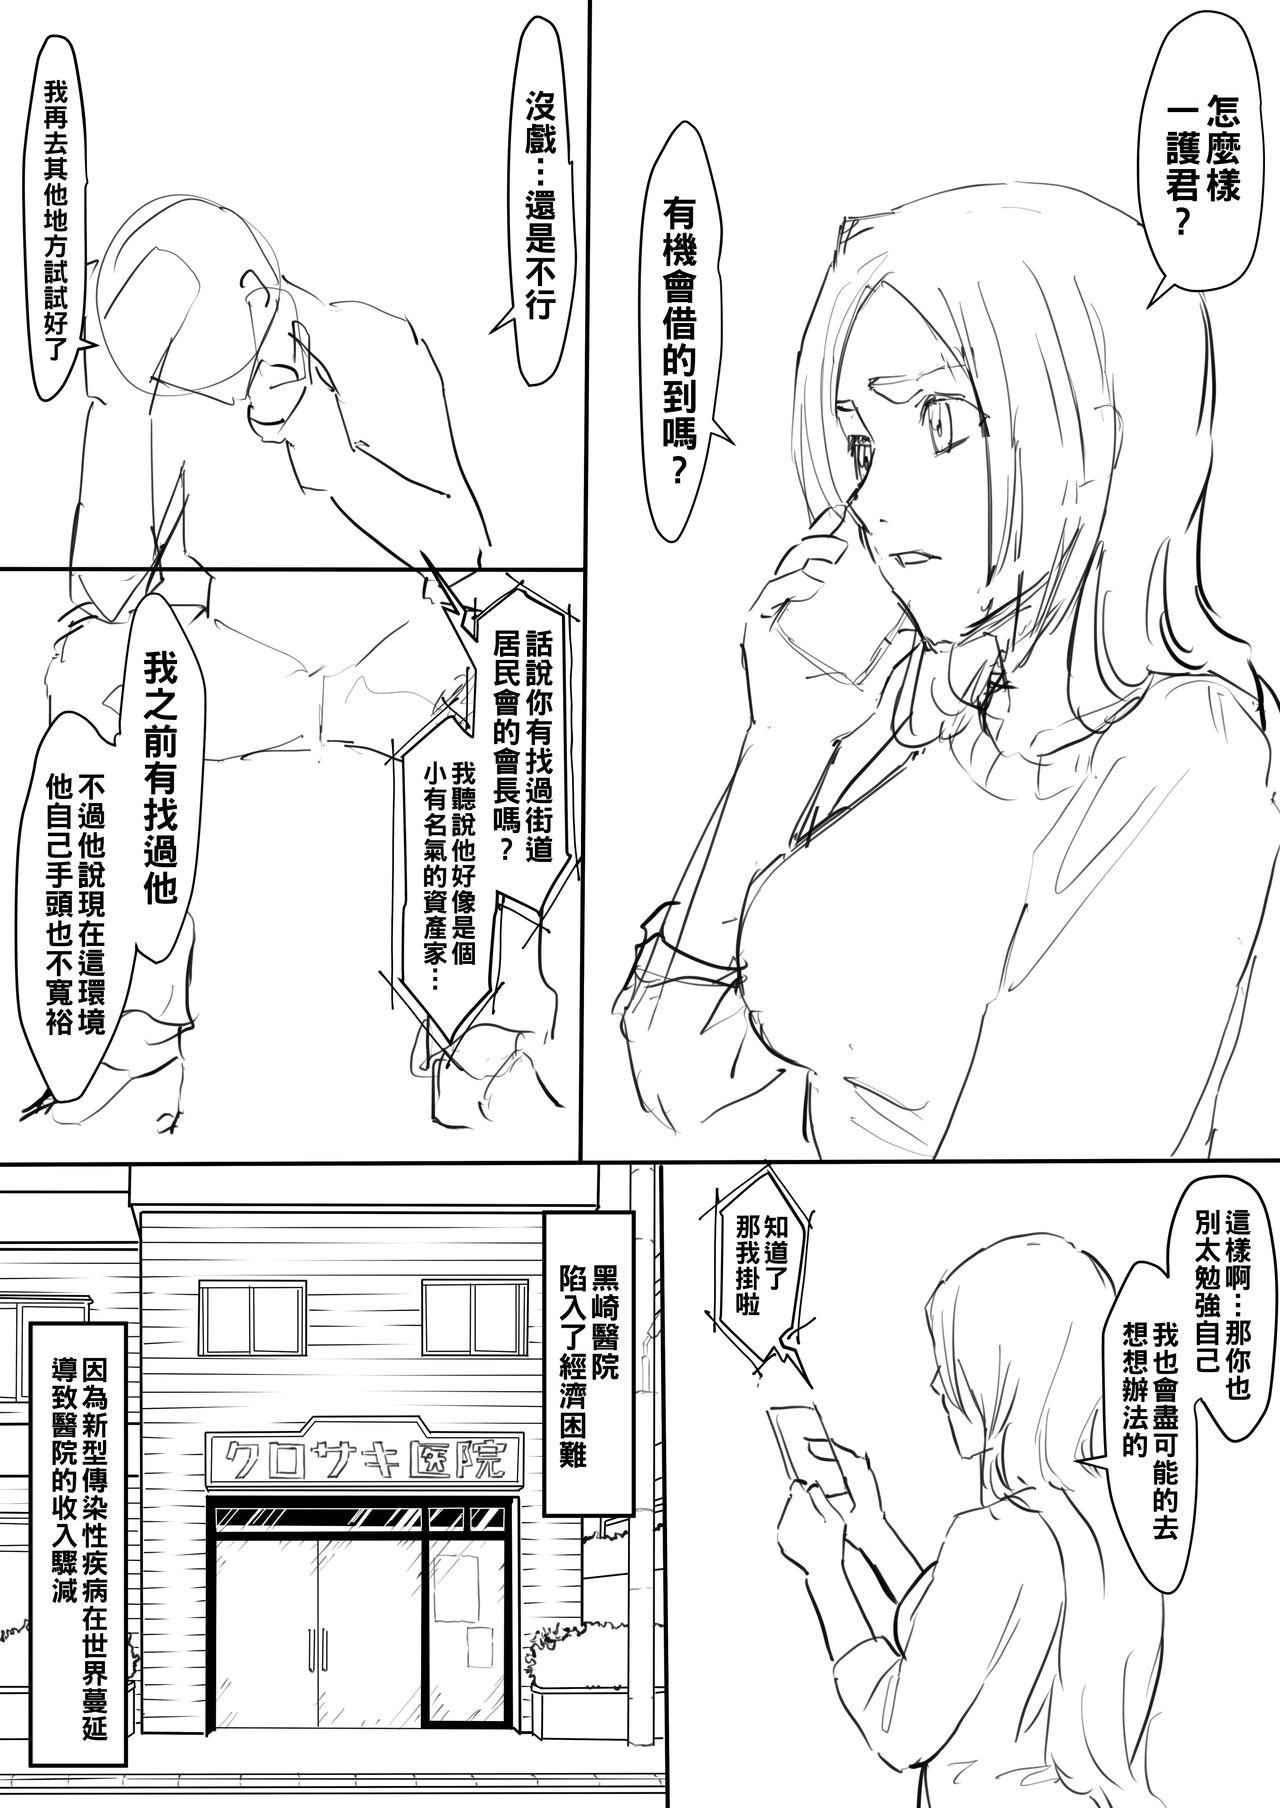 Collar Orihime Manga - Bleach Topless - Picture 1